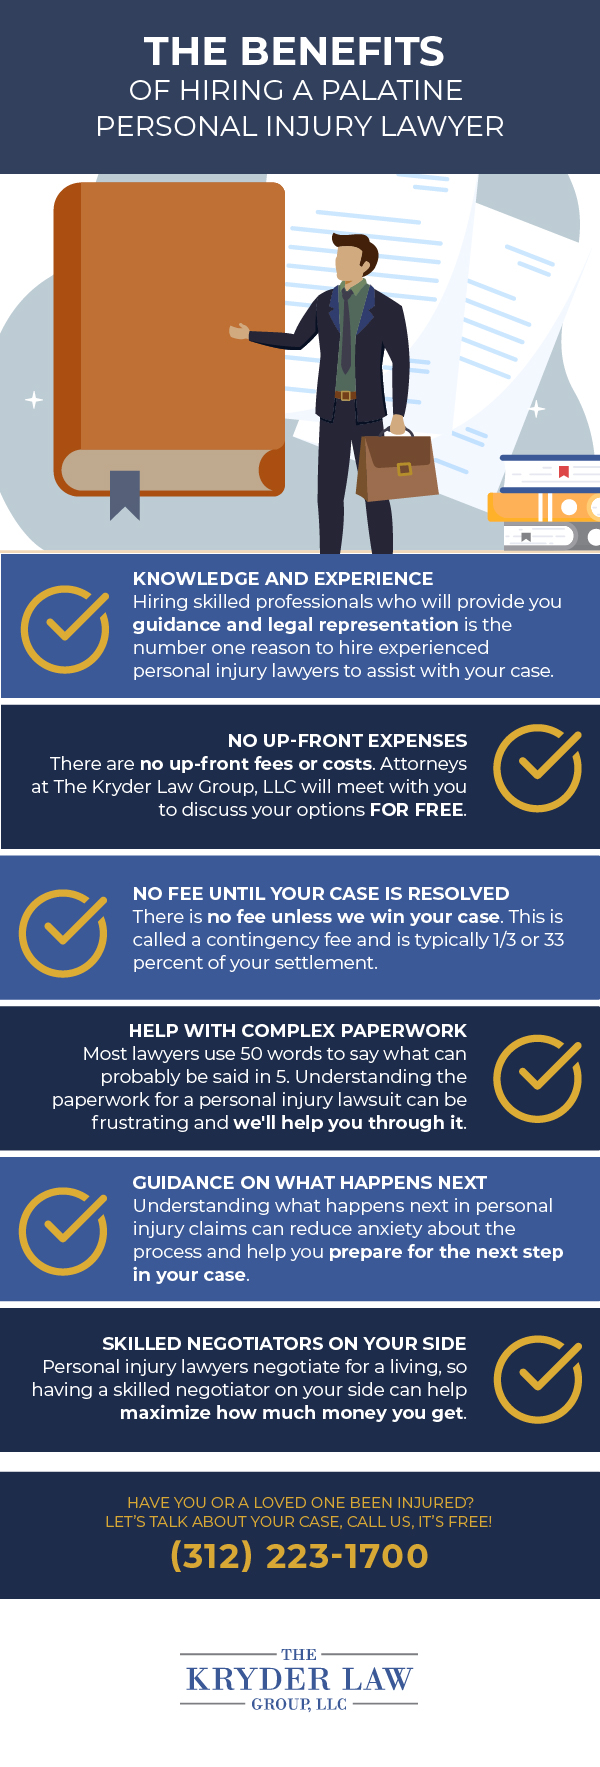 The Benefits of Hiring a Palatine Personal Injury Lawyer Infographic